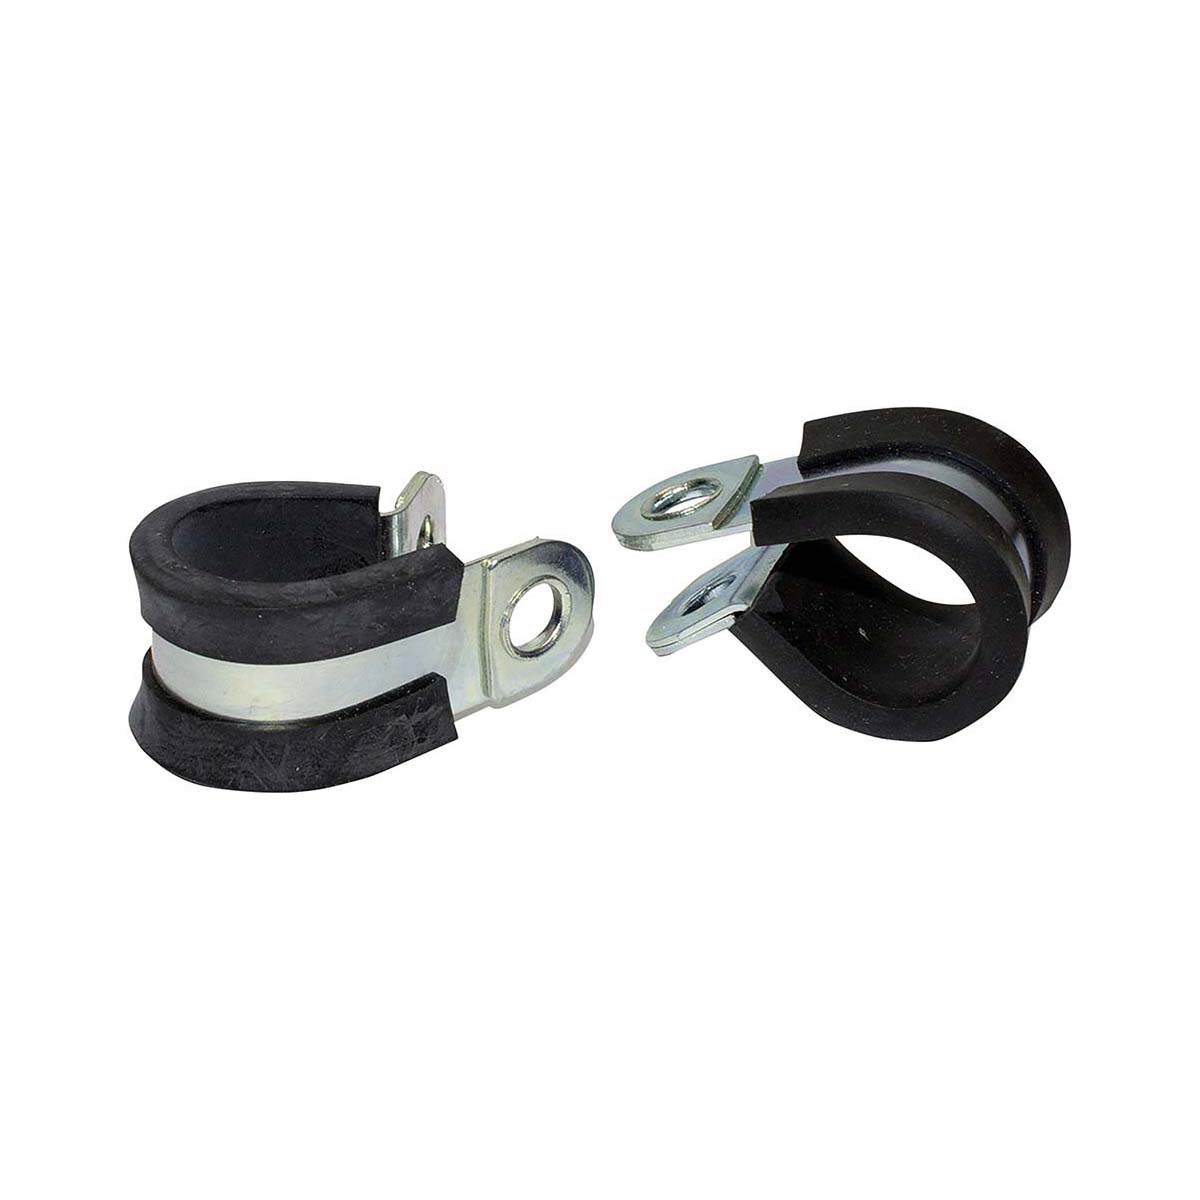 KT Cables 8mm Rubber & Metal P Clamps